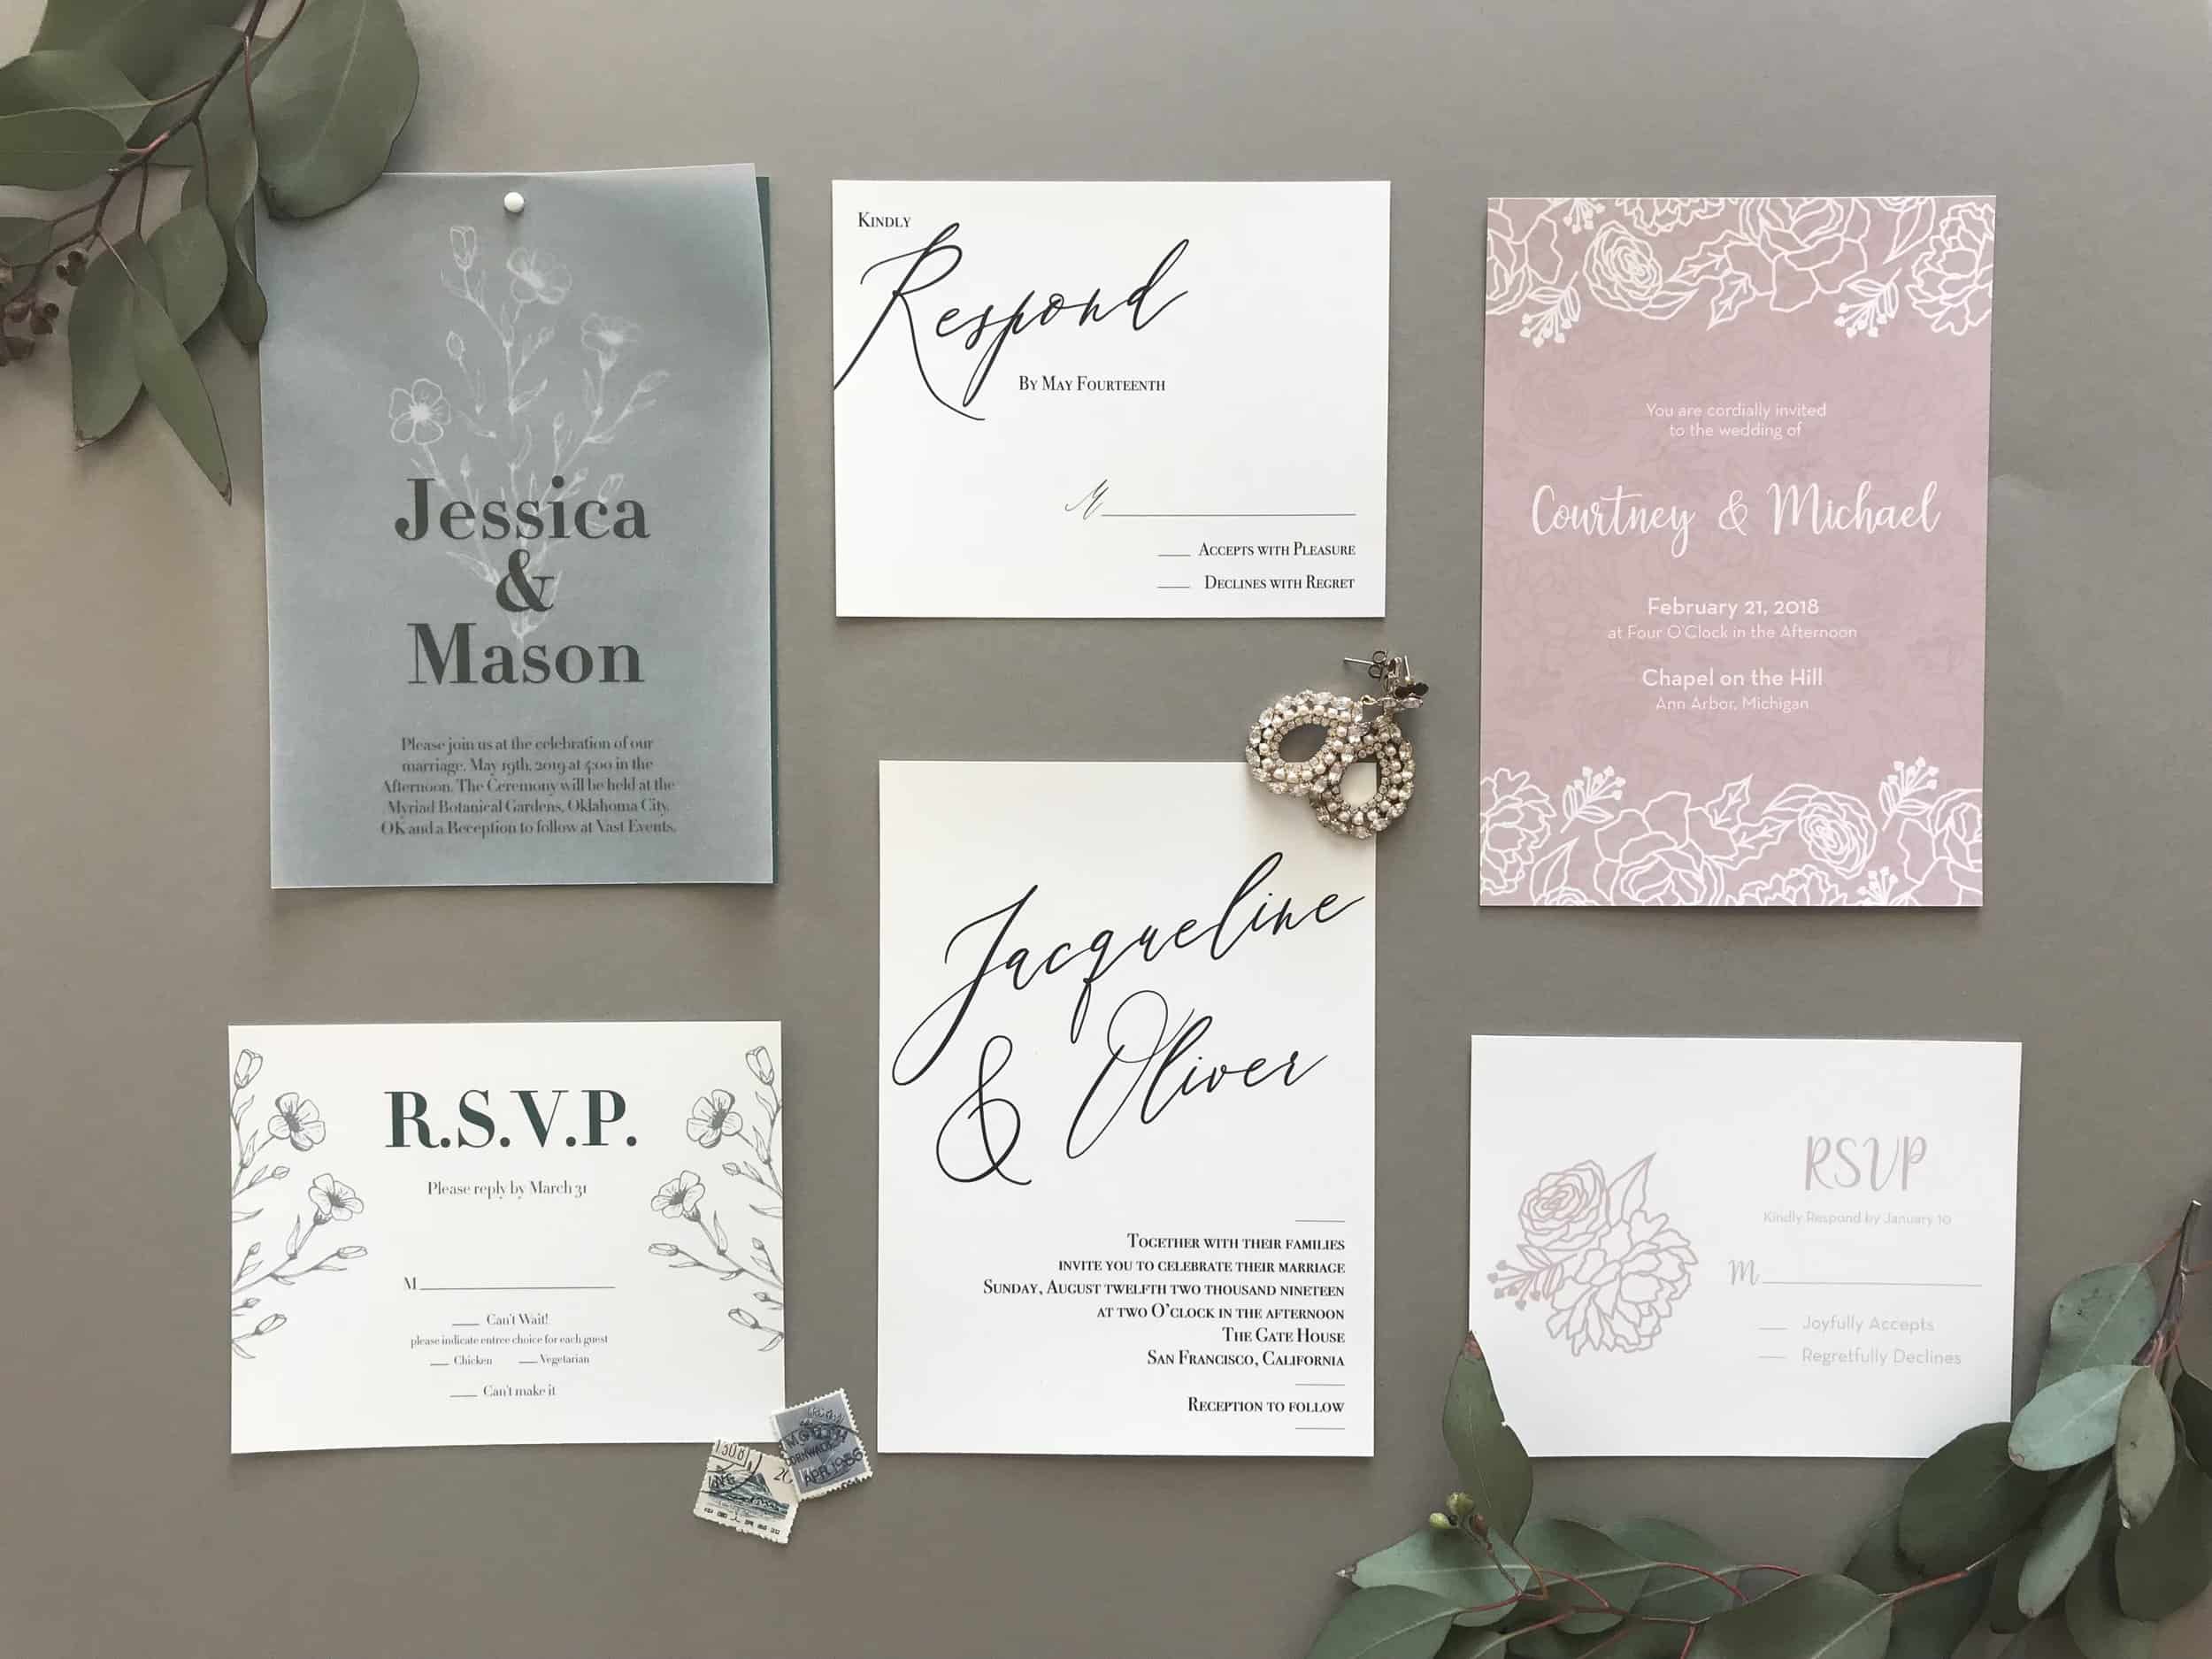 Parent’s Names and Wedding Invitations: Modern Etiquette - Stationery & Wedding Invitations